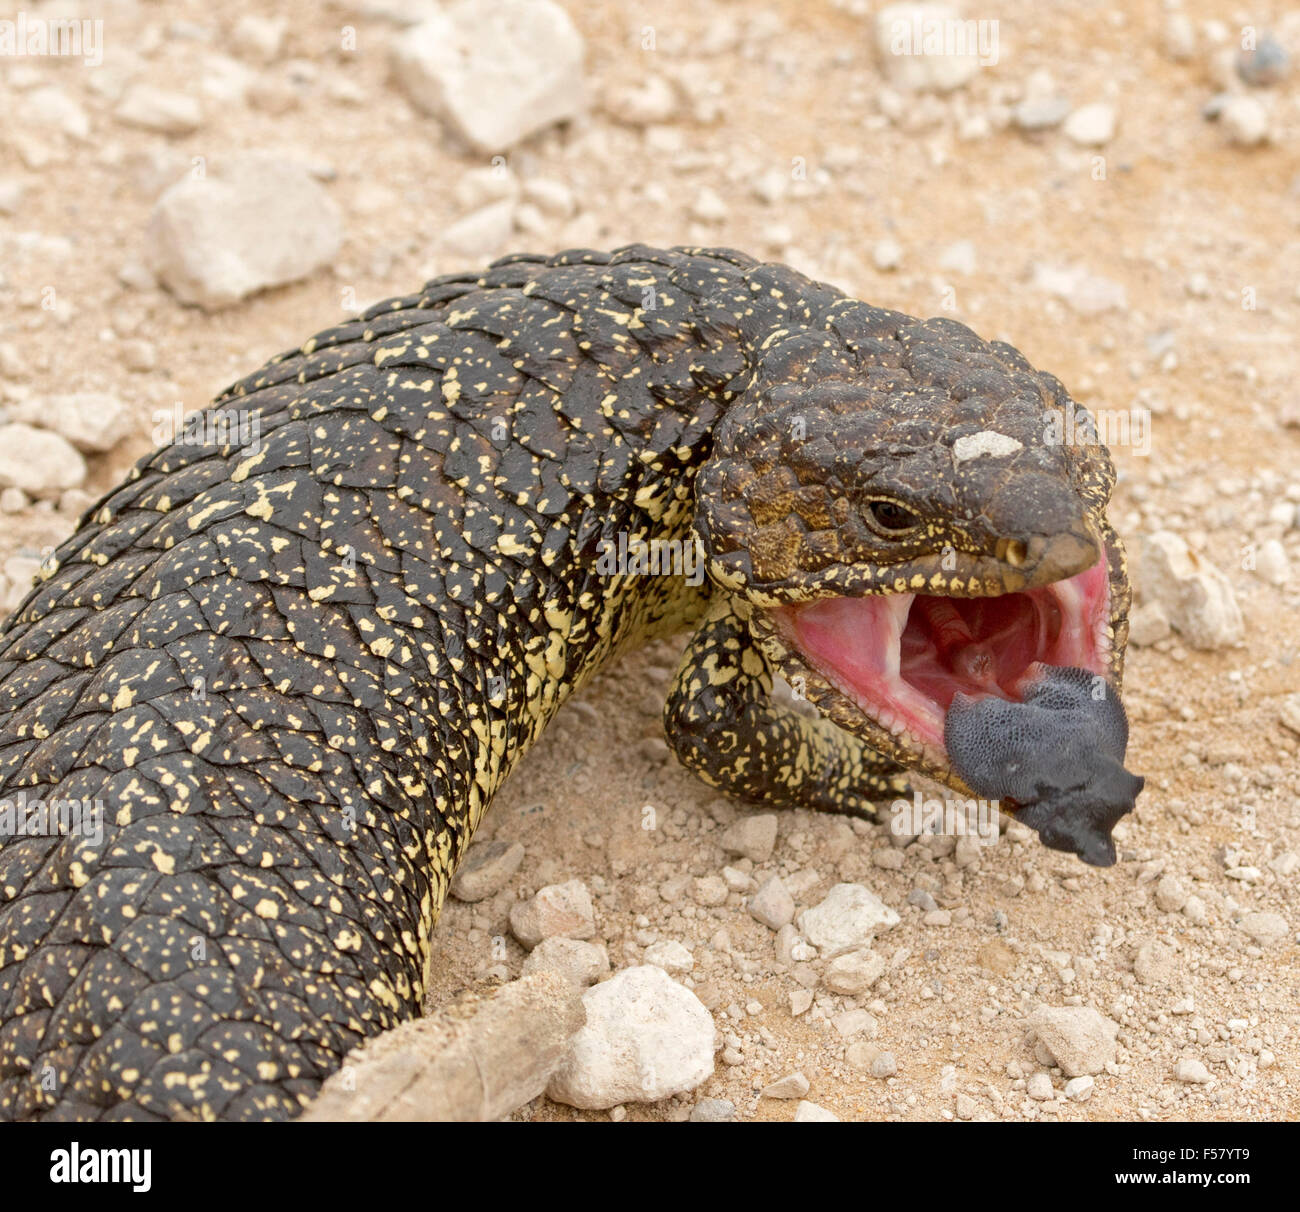 Close-up of shingleback lizard, Tiliqua rugosa, in aggressive pose with mouth open & blue tongue visible, in outback Australia Stock Photo